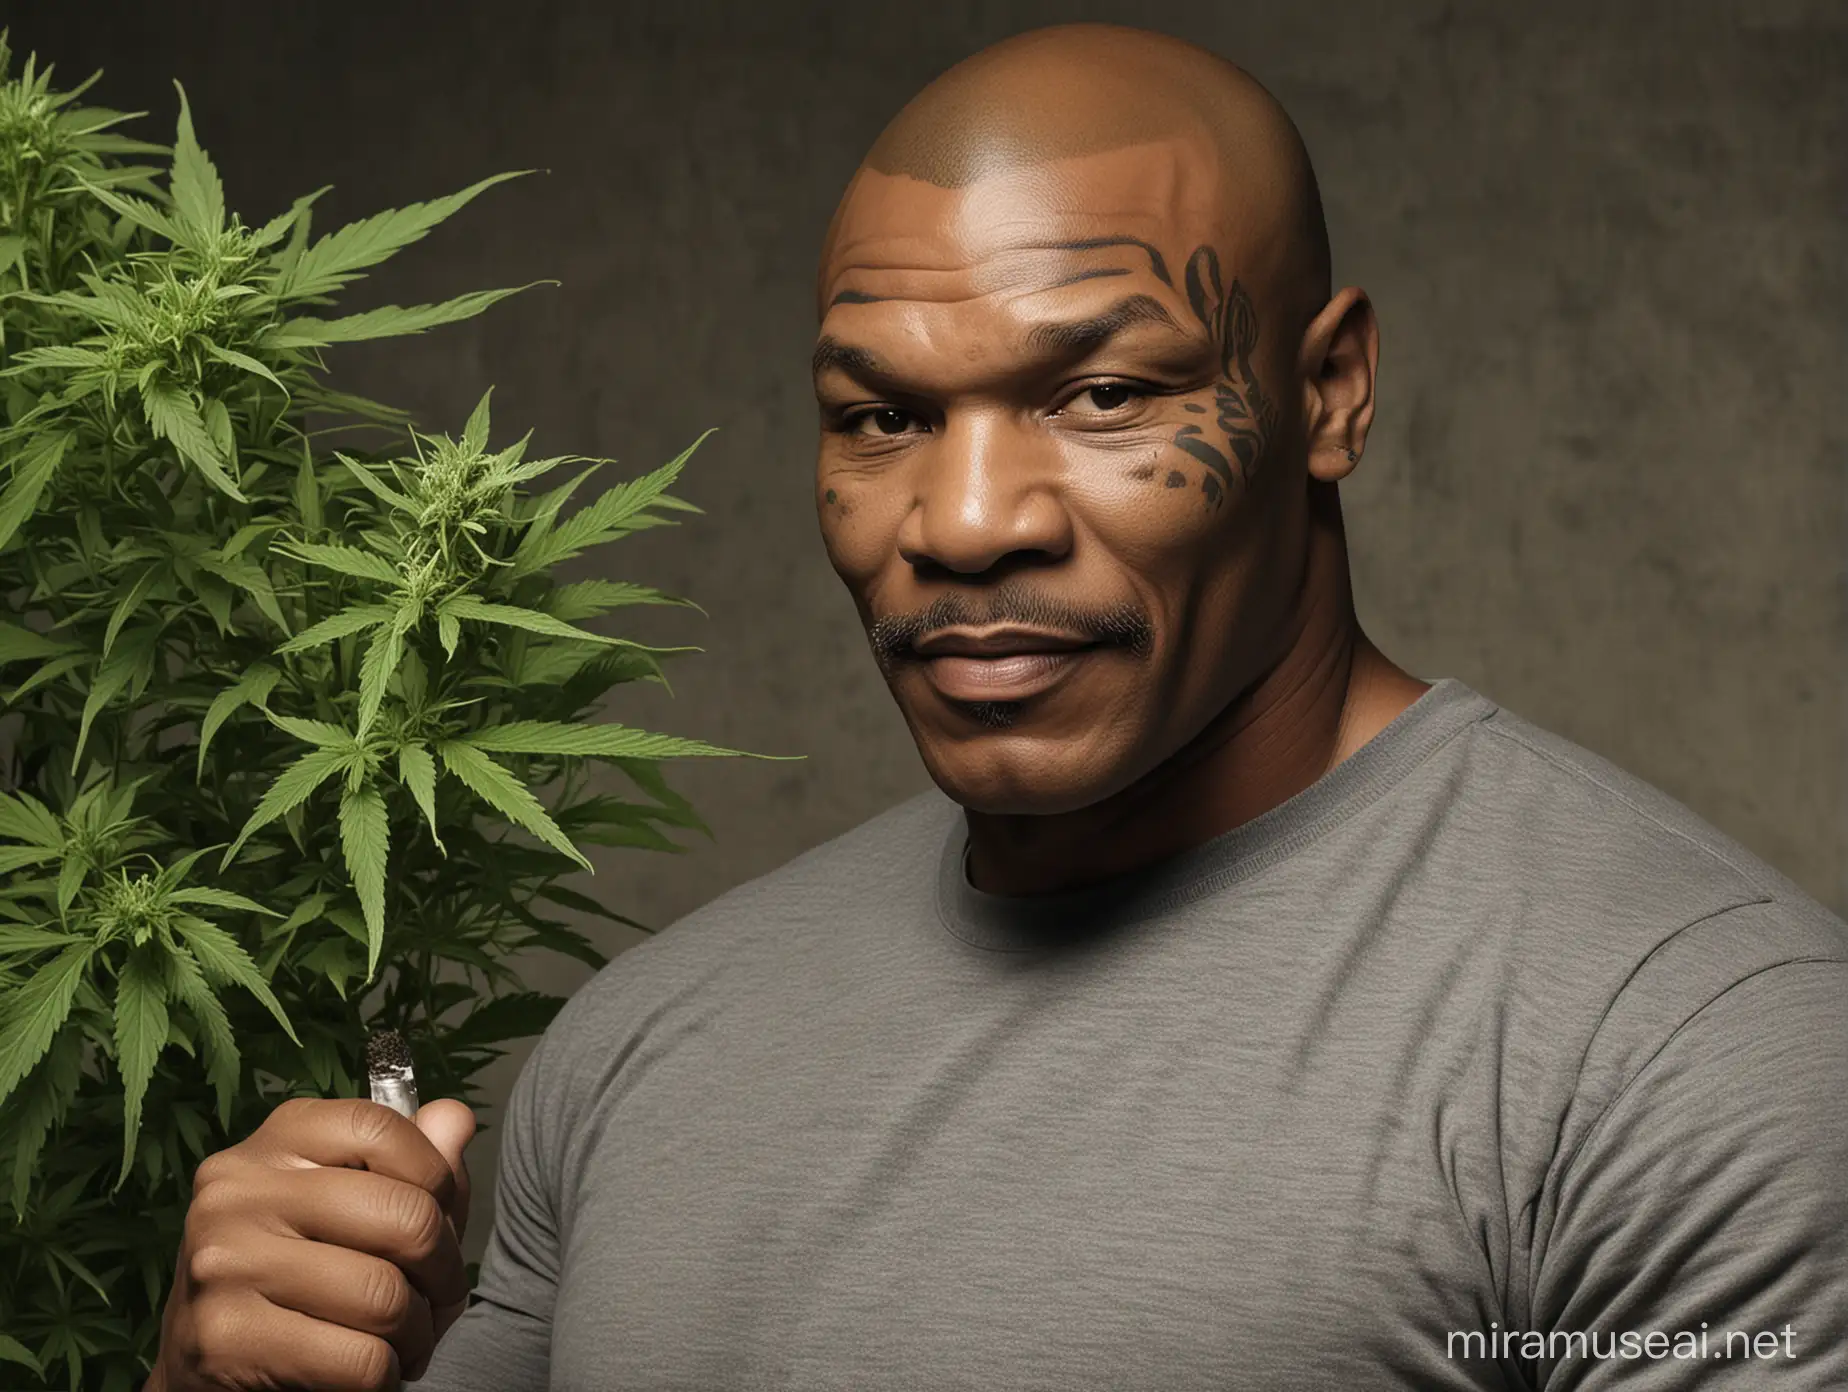 Mike Tyson Enjoying Cannabis Former Boxing Champion Embracing Relaxation and Wellness